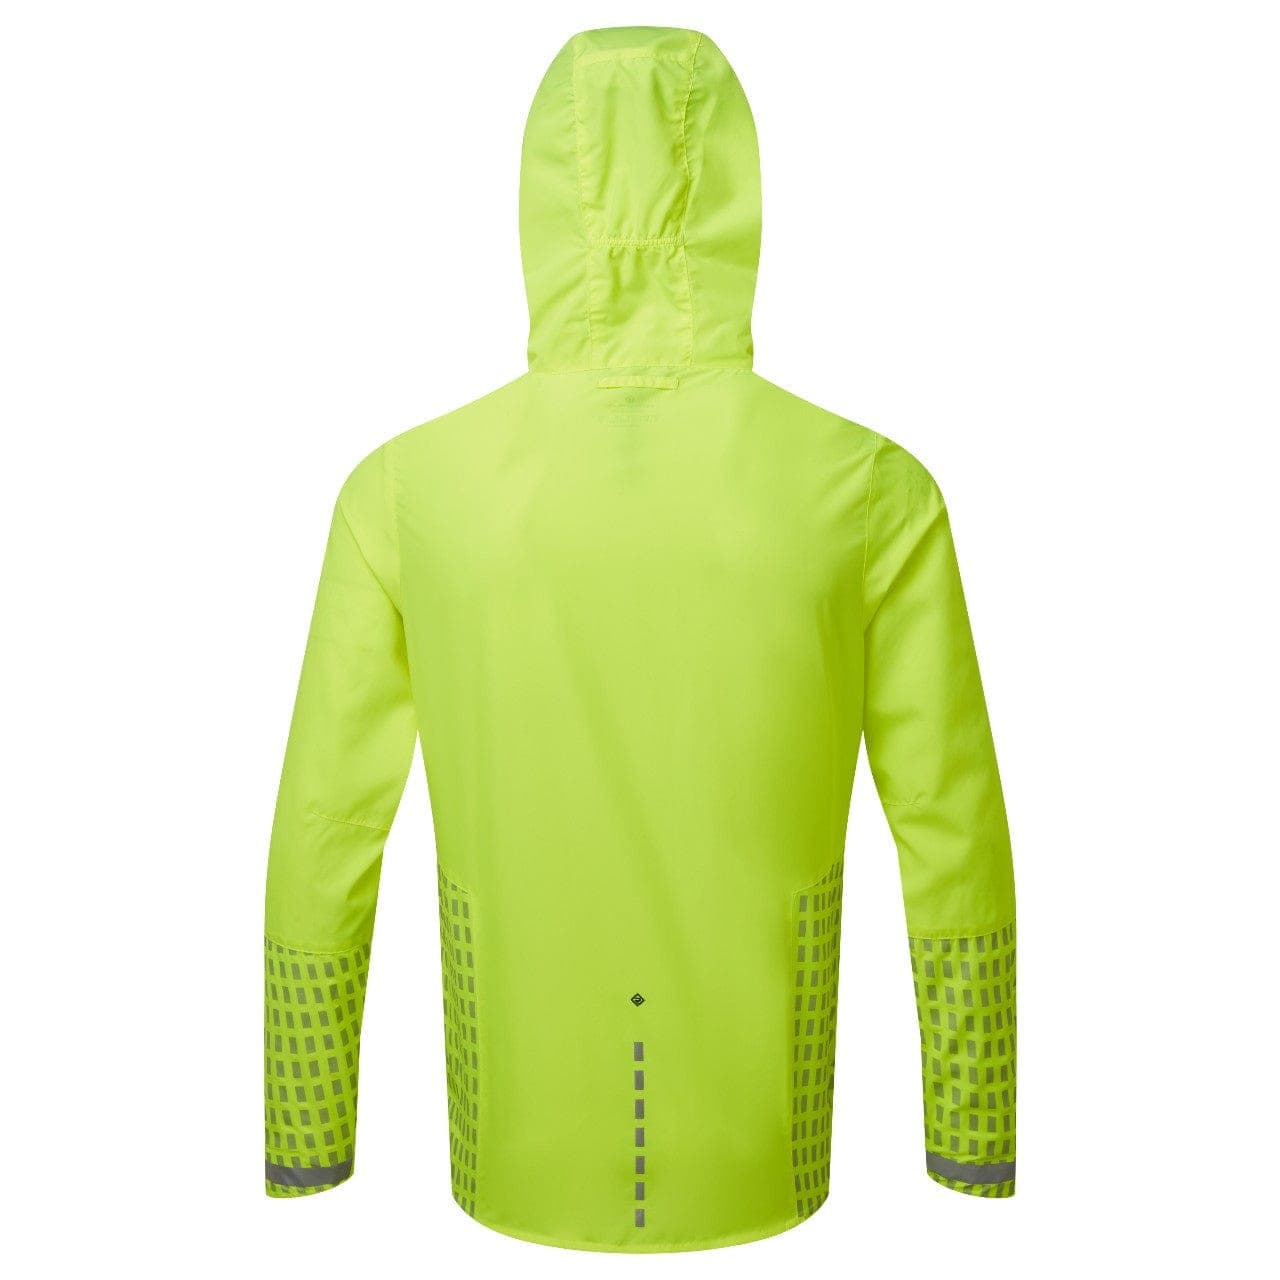 Ronhill Tech Afterhours Jacket (Mens) - Fluo Yellow/Charcoal/Reflective